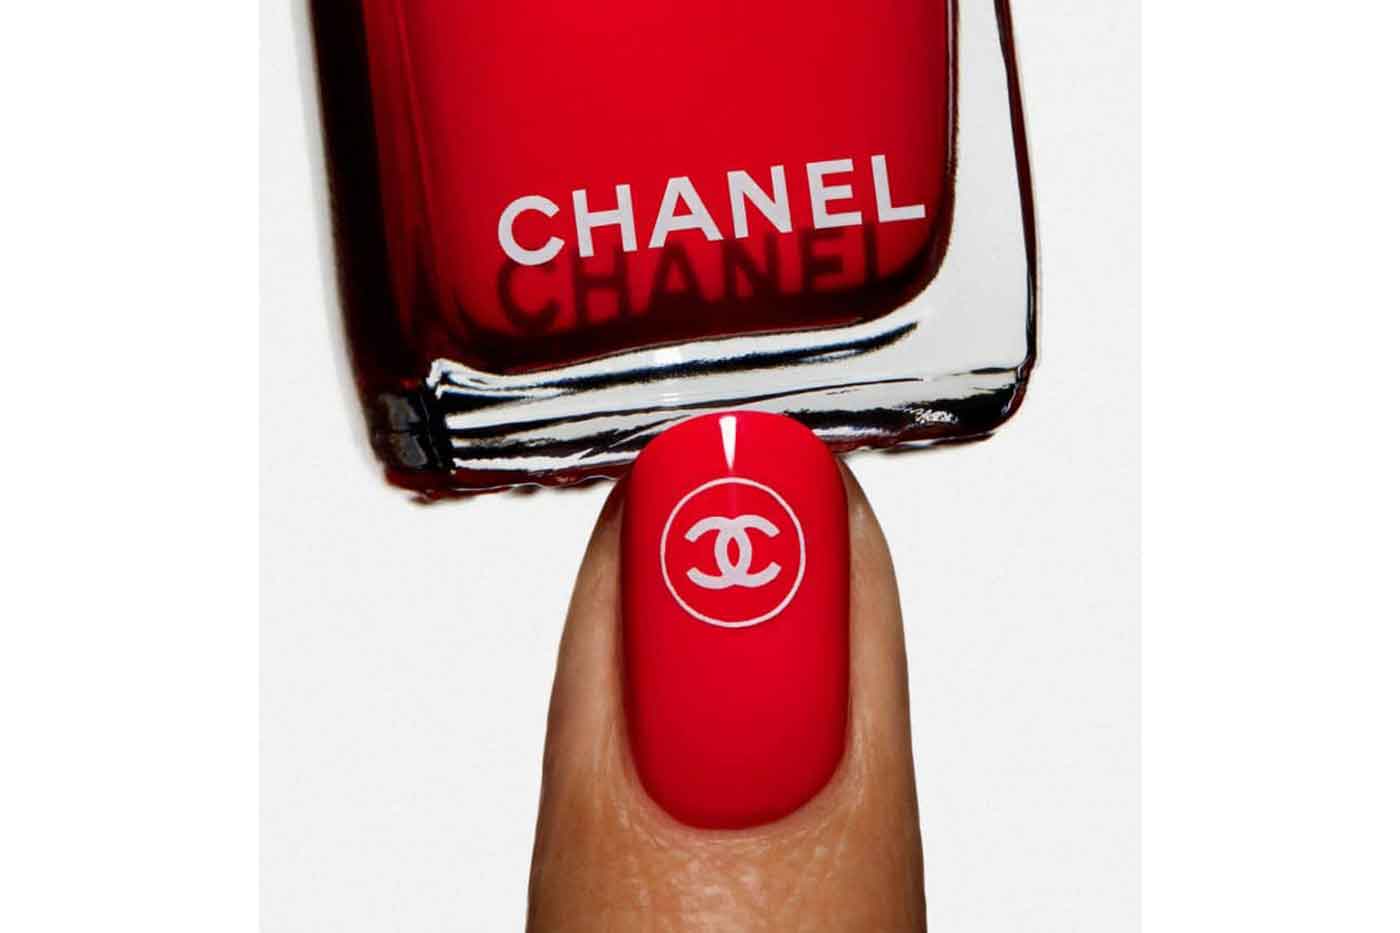 Chanel launches new nail art collection